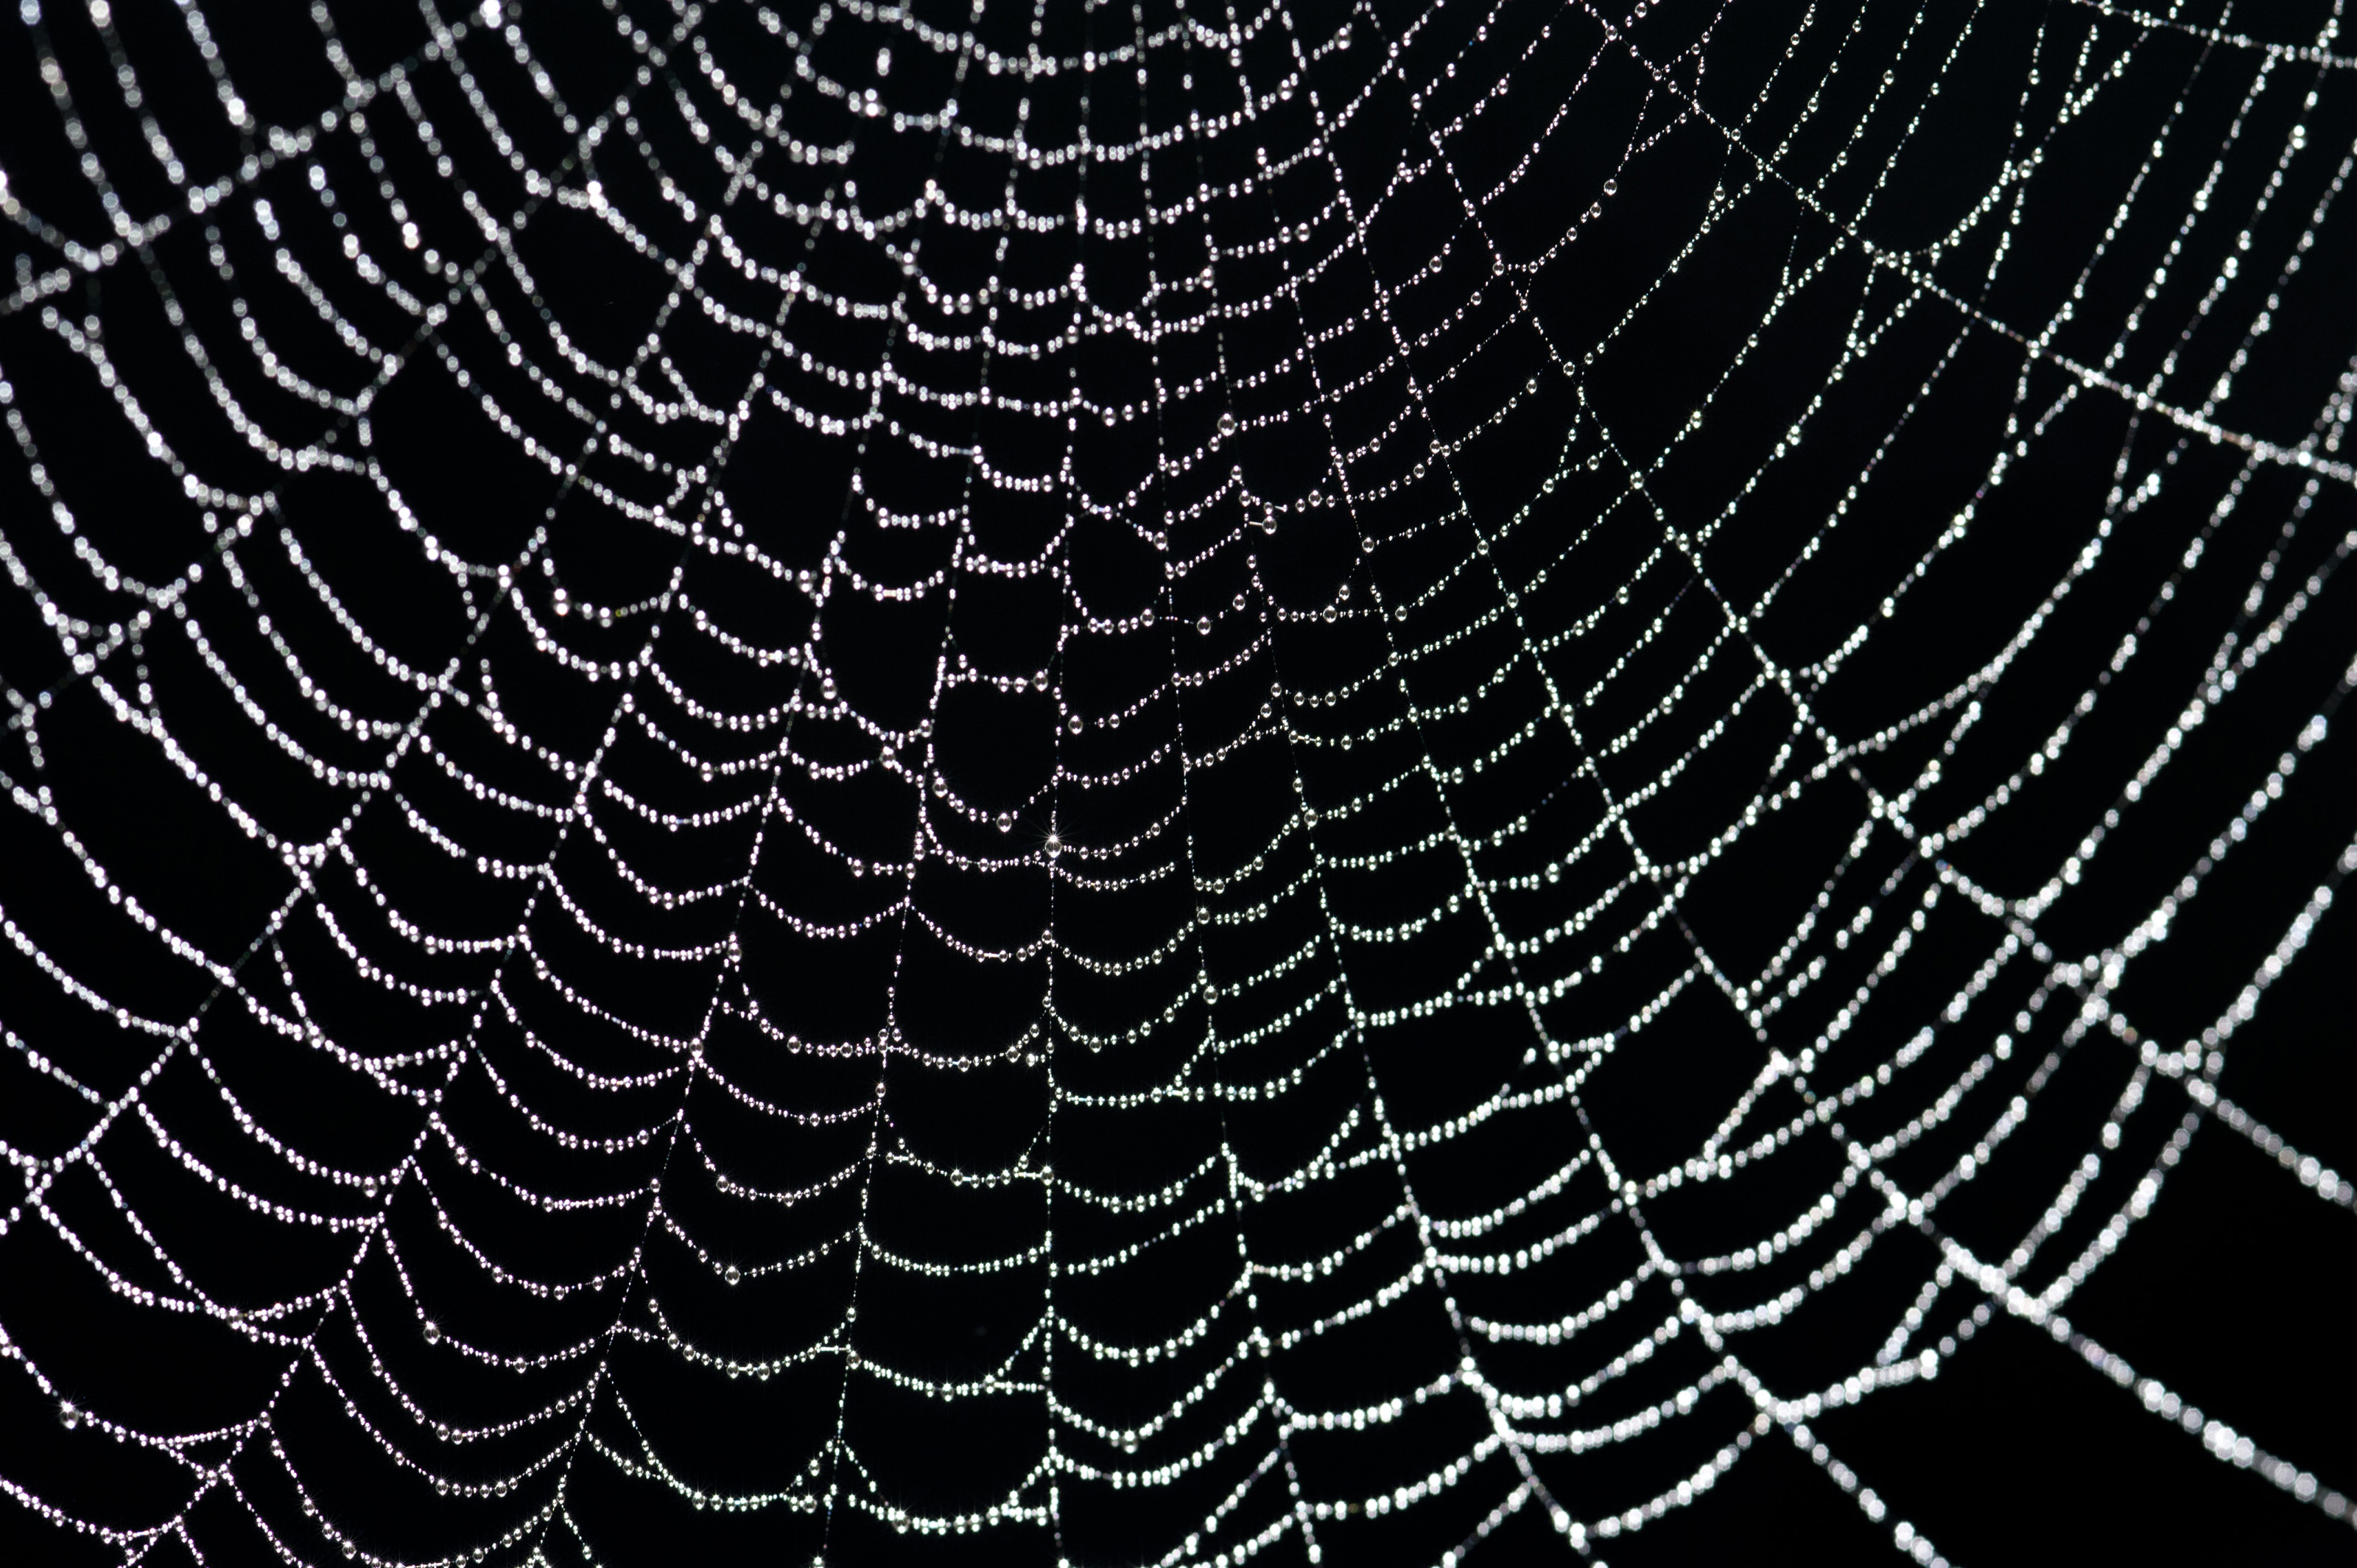 Sparkling Water Droplets In A Spider Web Stockarch